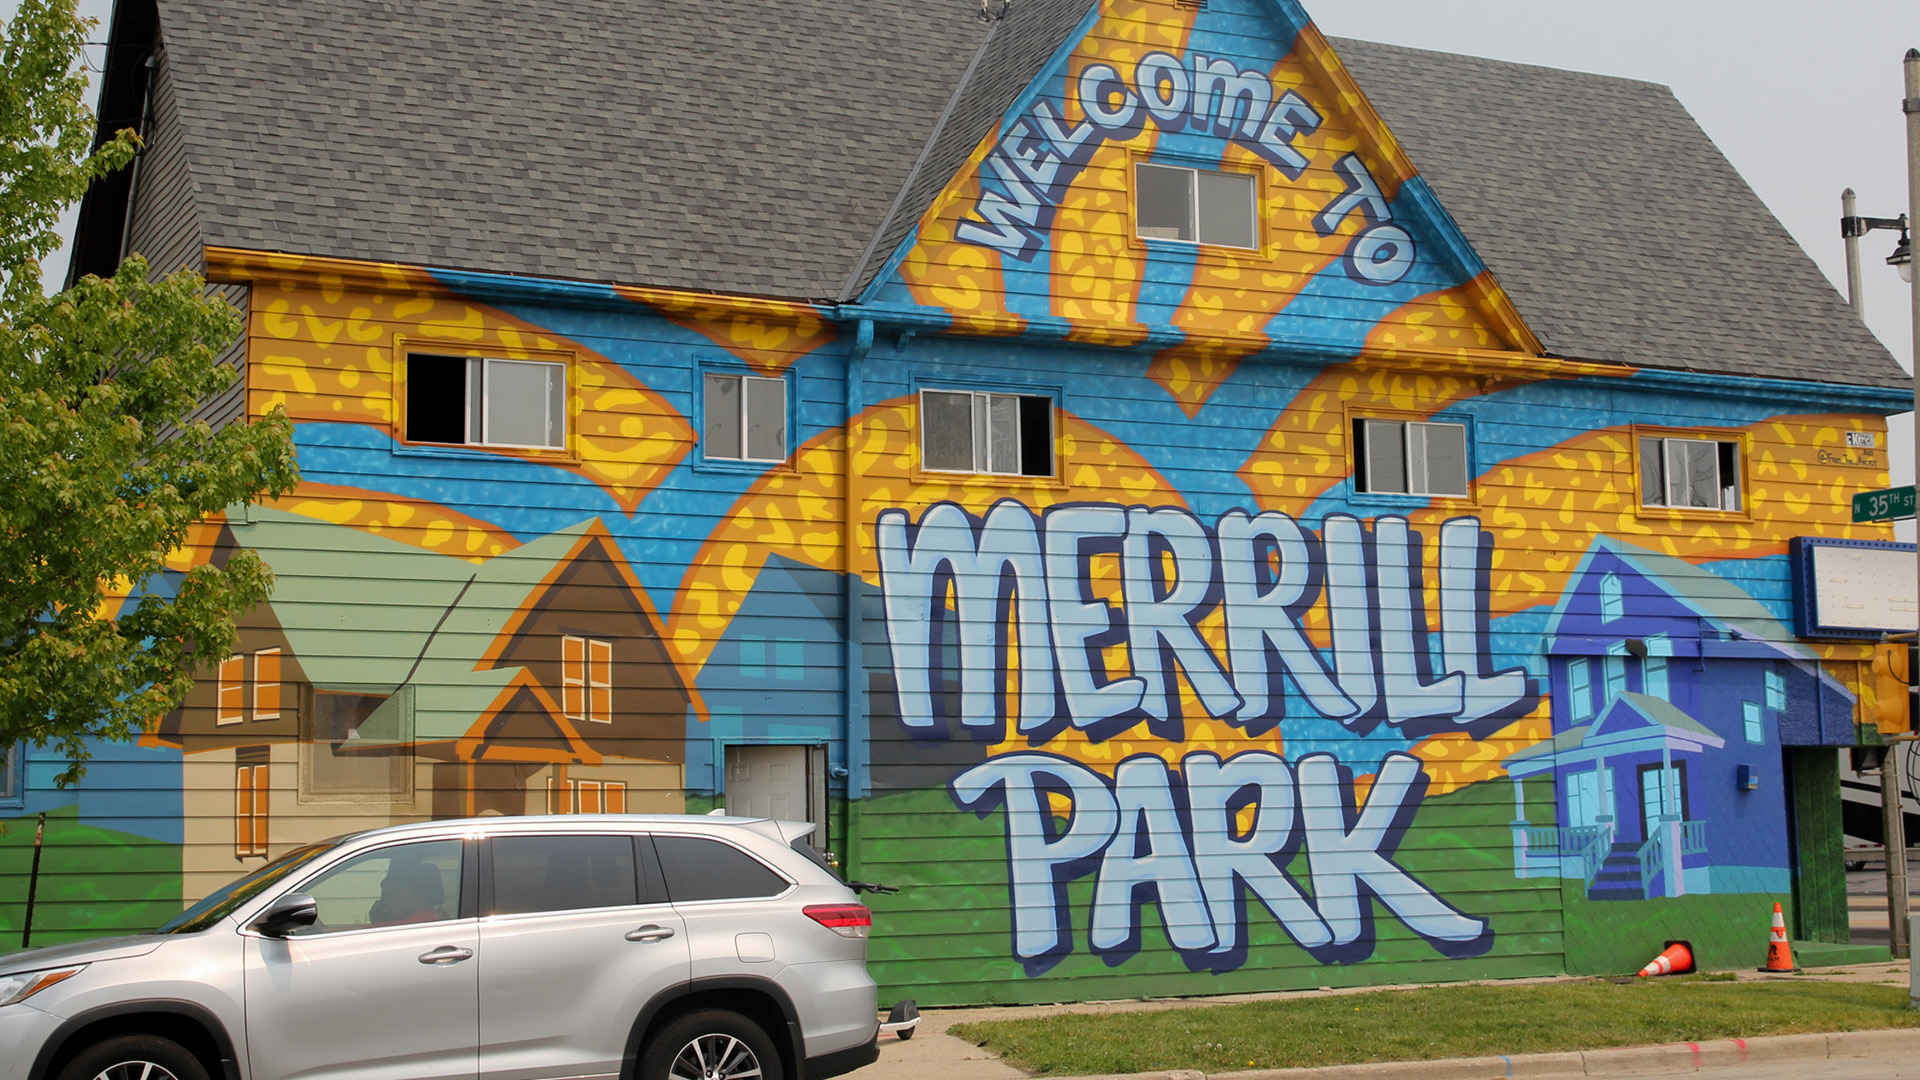 A mural featuring houses, sunrays and the words "Welcome to Merrill Park" is painted on the side of a three-story building, with a parked car in the foreground.